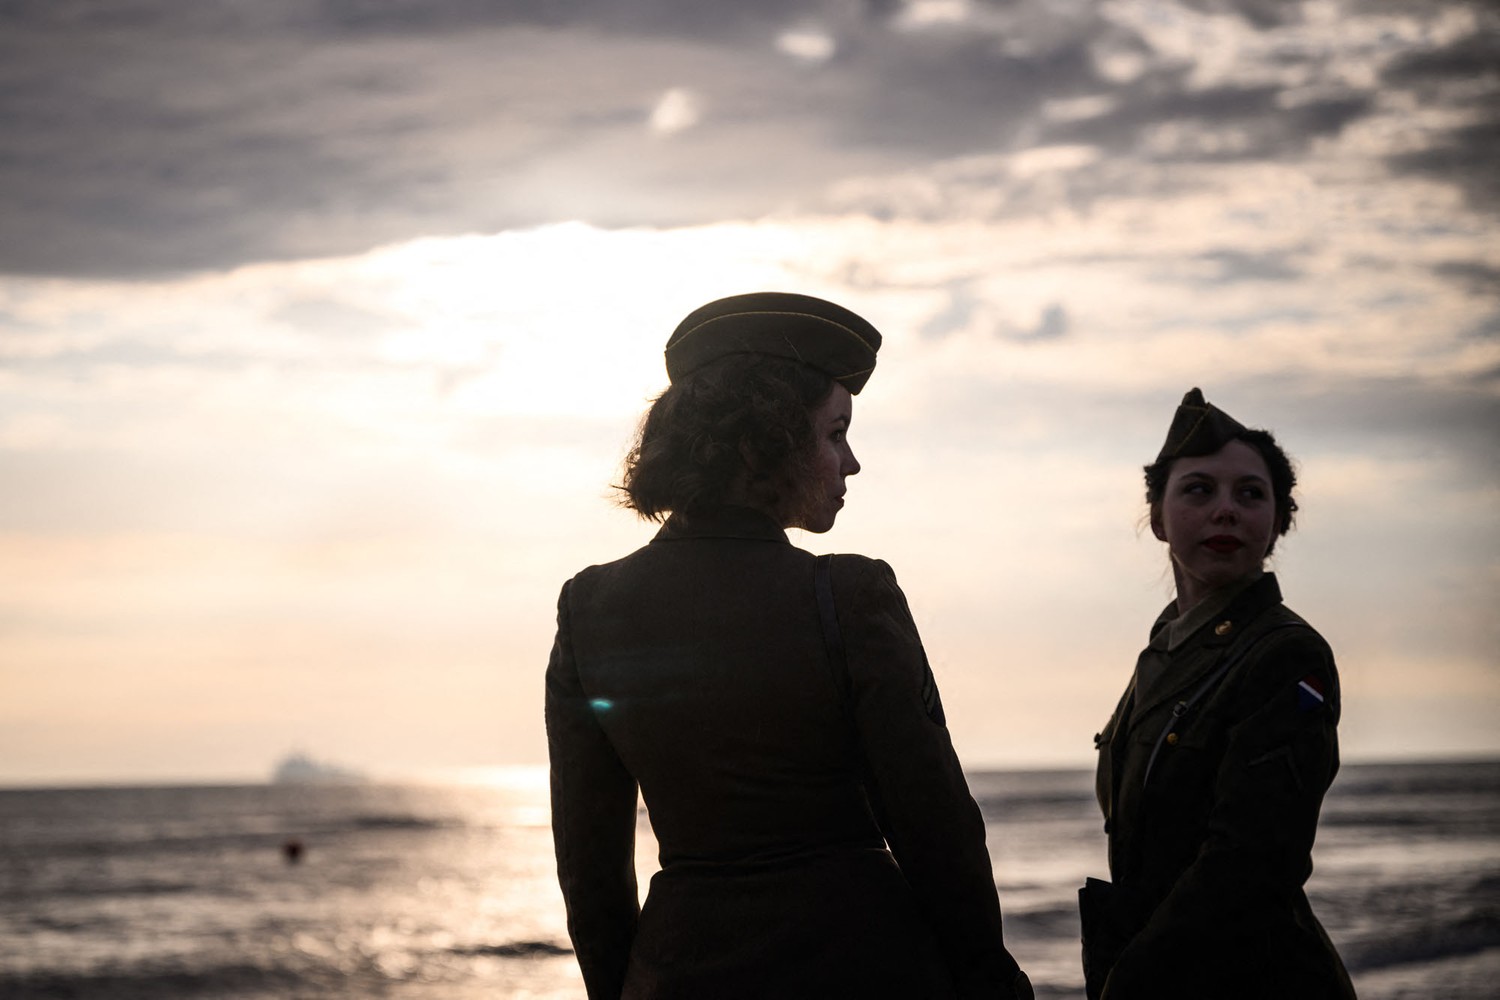 Link to The Atlantic Photos: Commemorating the 80th Anniversary of the D-Day Landings